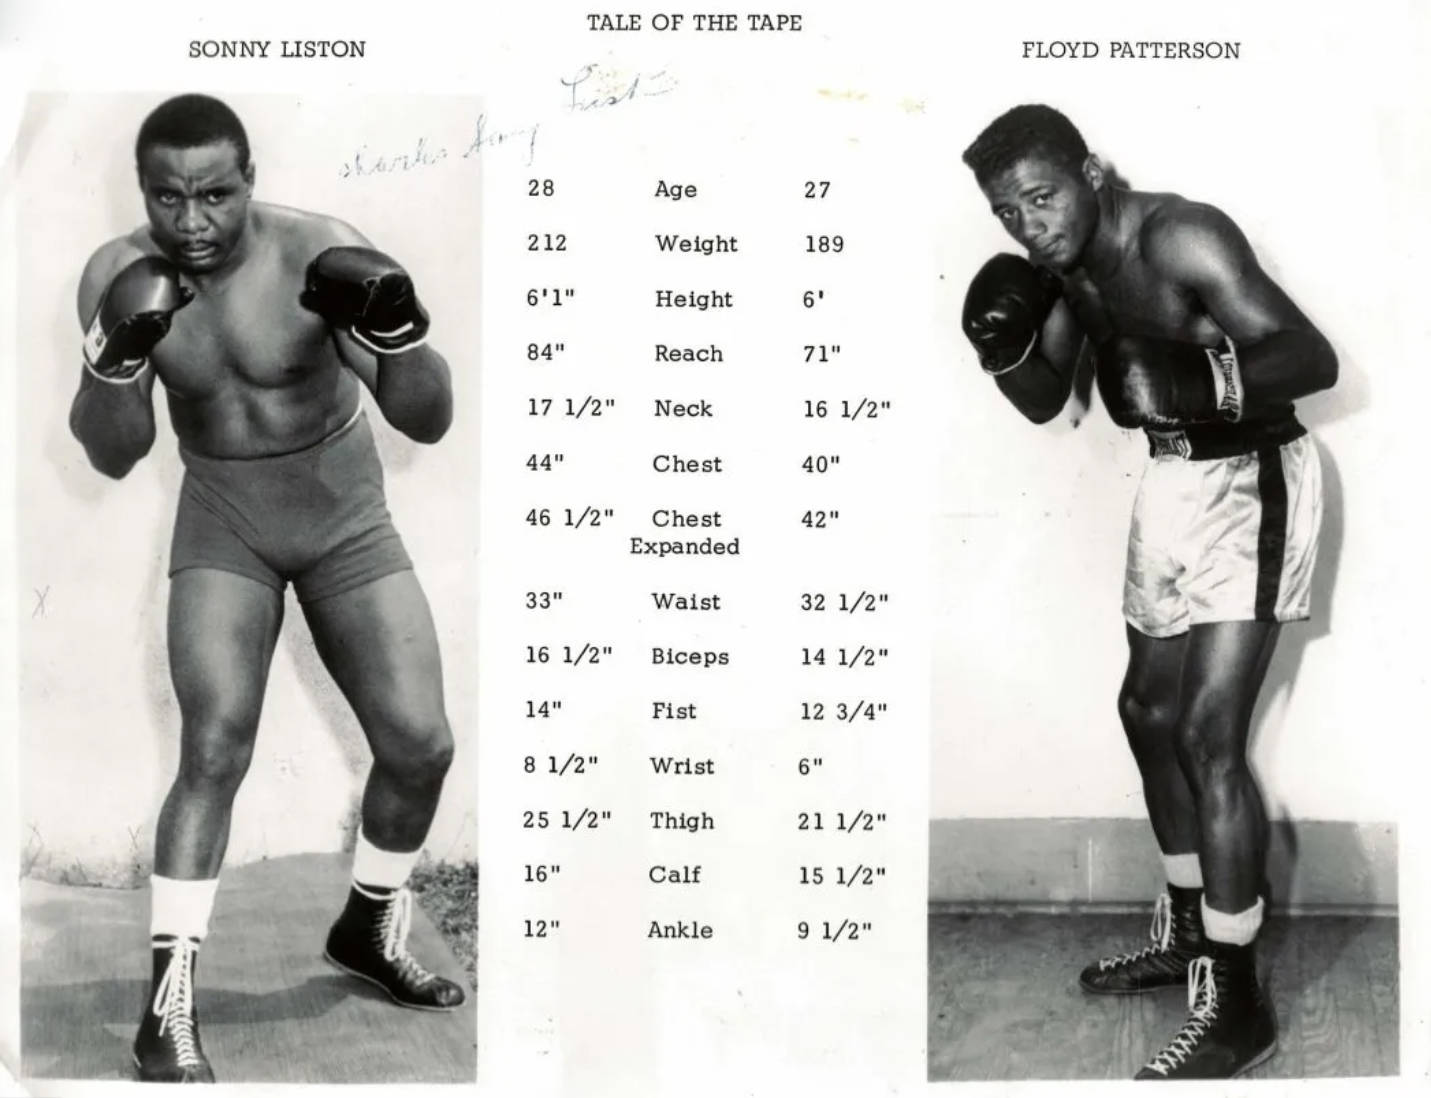 Sonny Liston And Floyd Patterson Tale Of The Tape Wallpaper